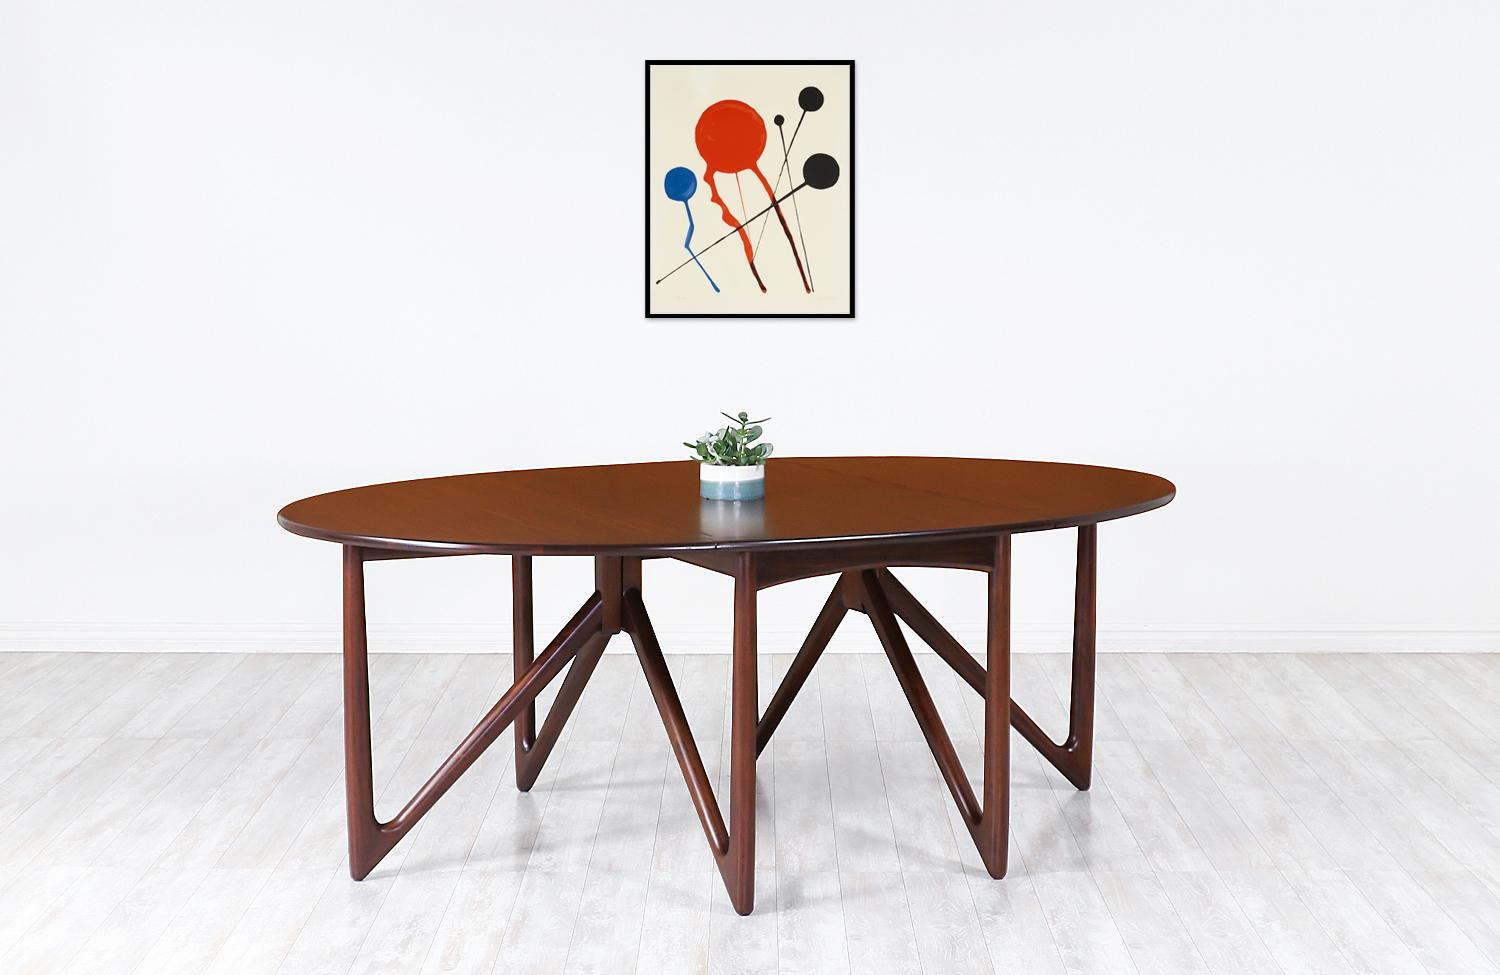 Versatile dining table designed by Danish designer Niels Koefed in collaboration with the workshop of Koefoeds Møbelfabrik during the 1960s. Crafted from Brazilian rosewood, this table functions as a console, writing, or dining table with a